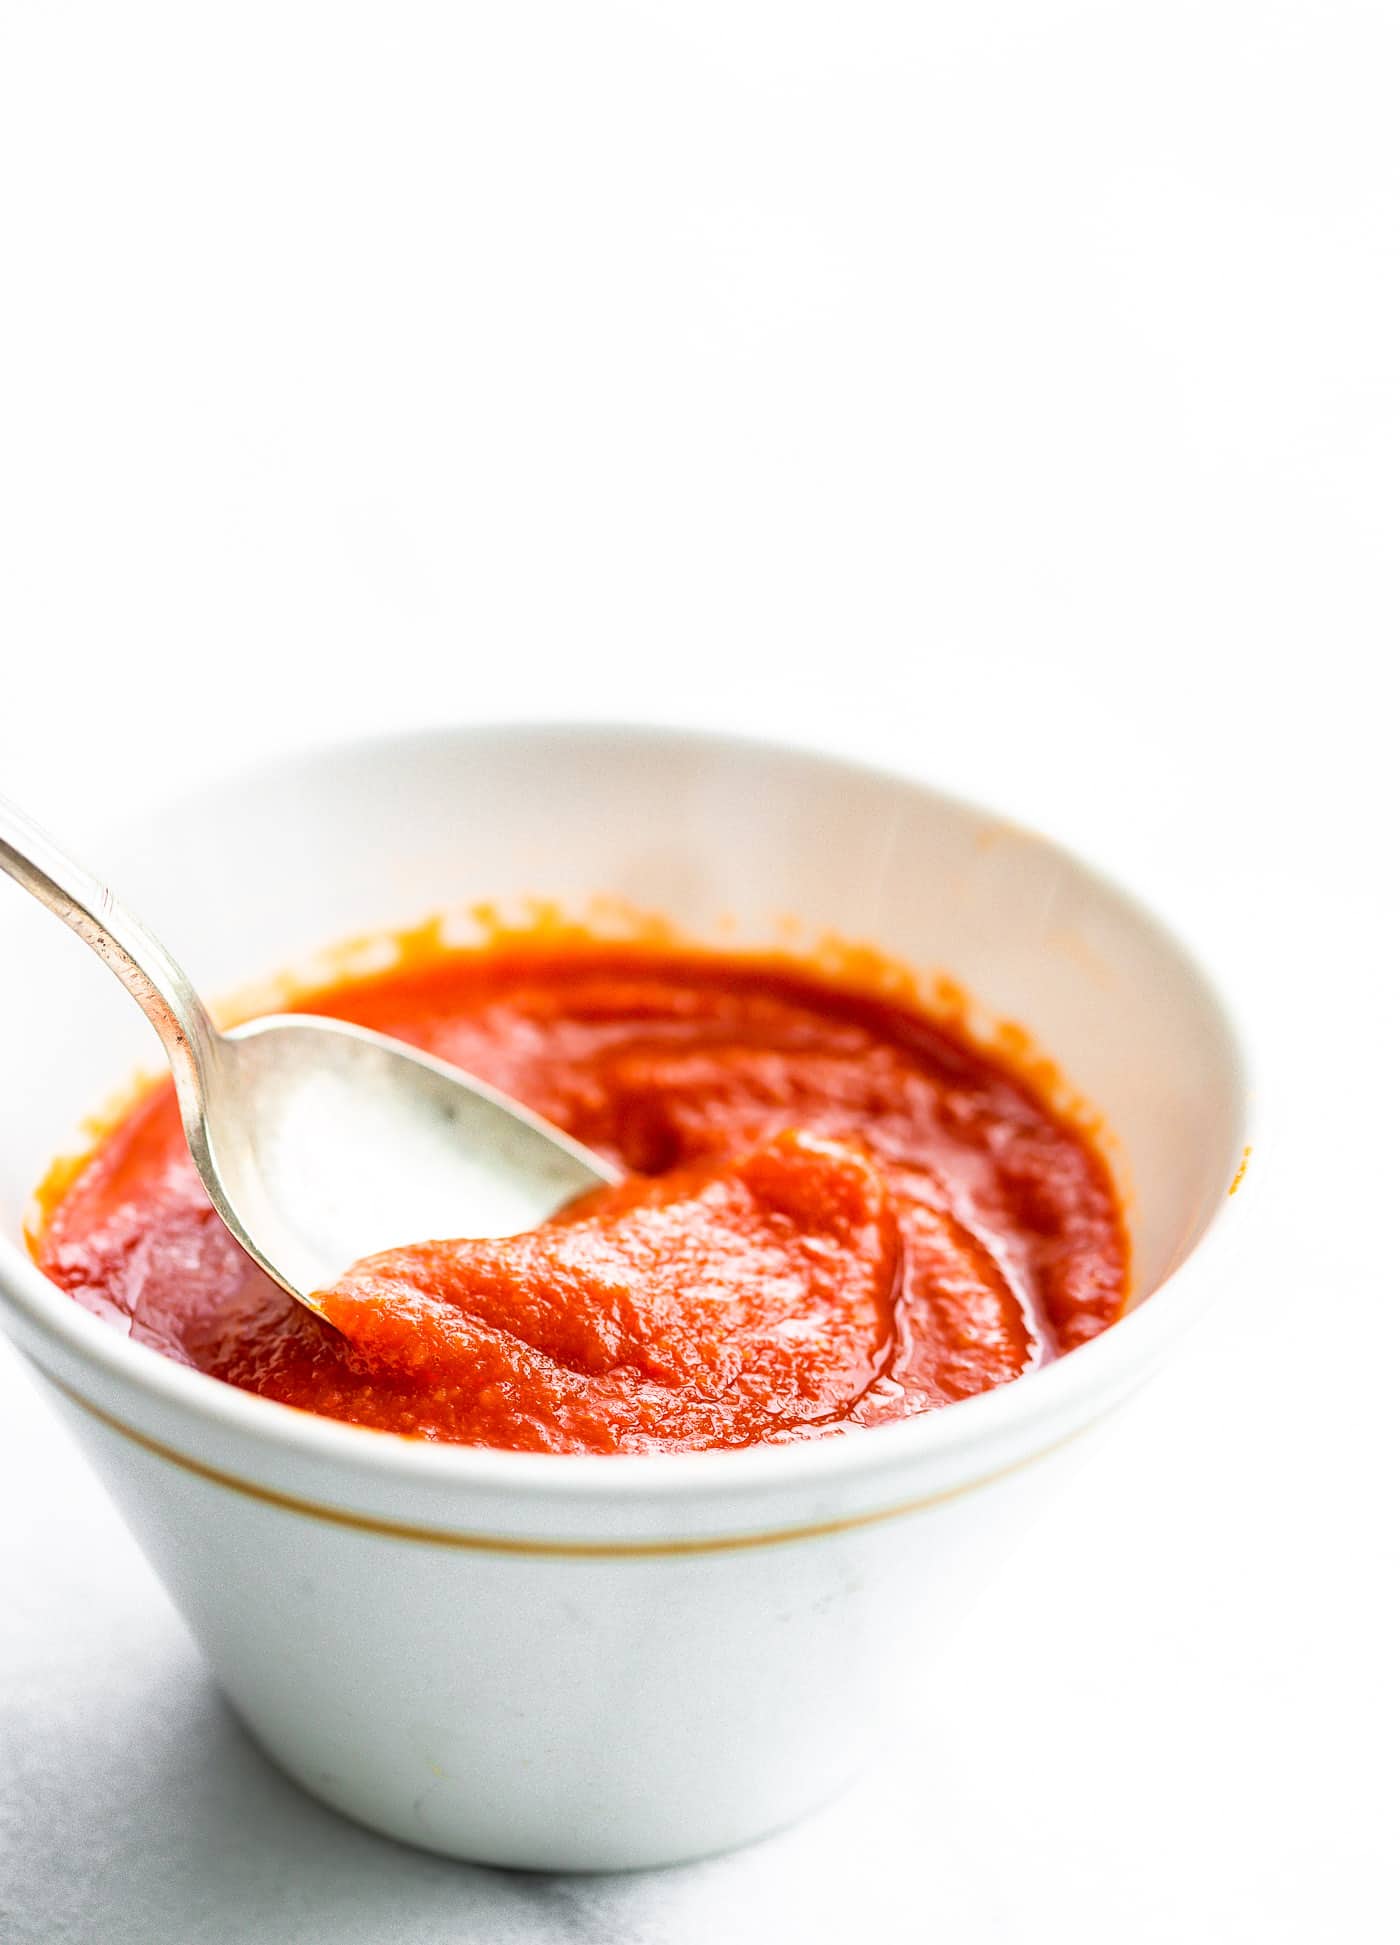 Close up image of homemade hot sauce in a white bowl with a silver spoon.